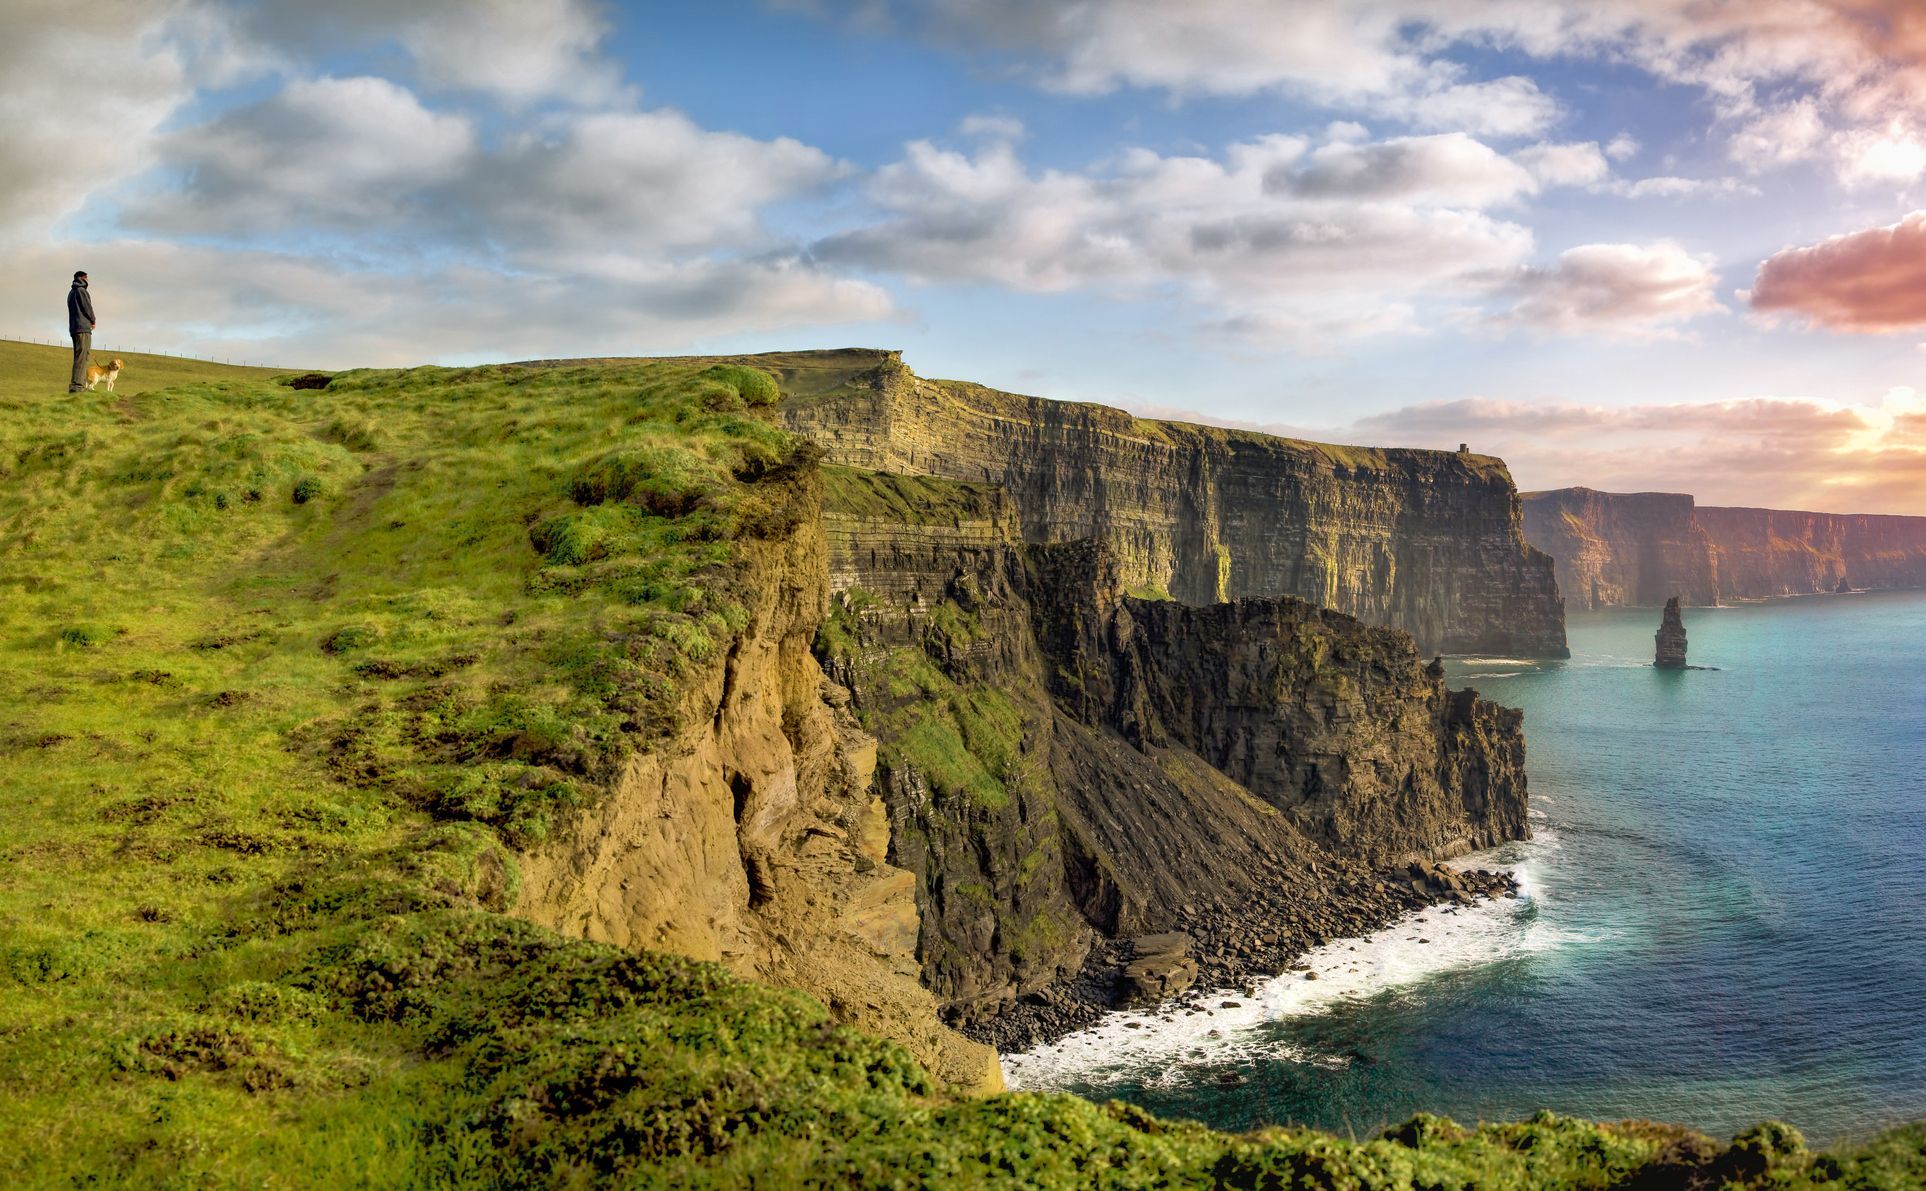 Is this Cliffs of Moher waterfall going up instead of down?